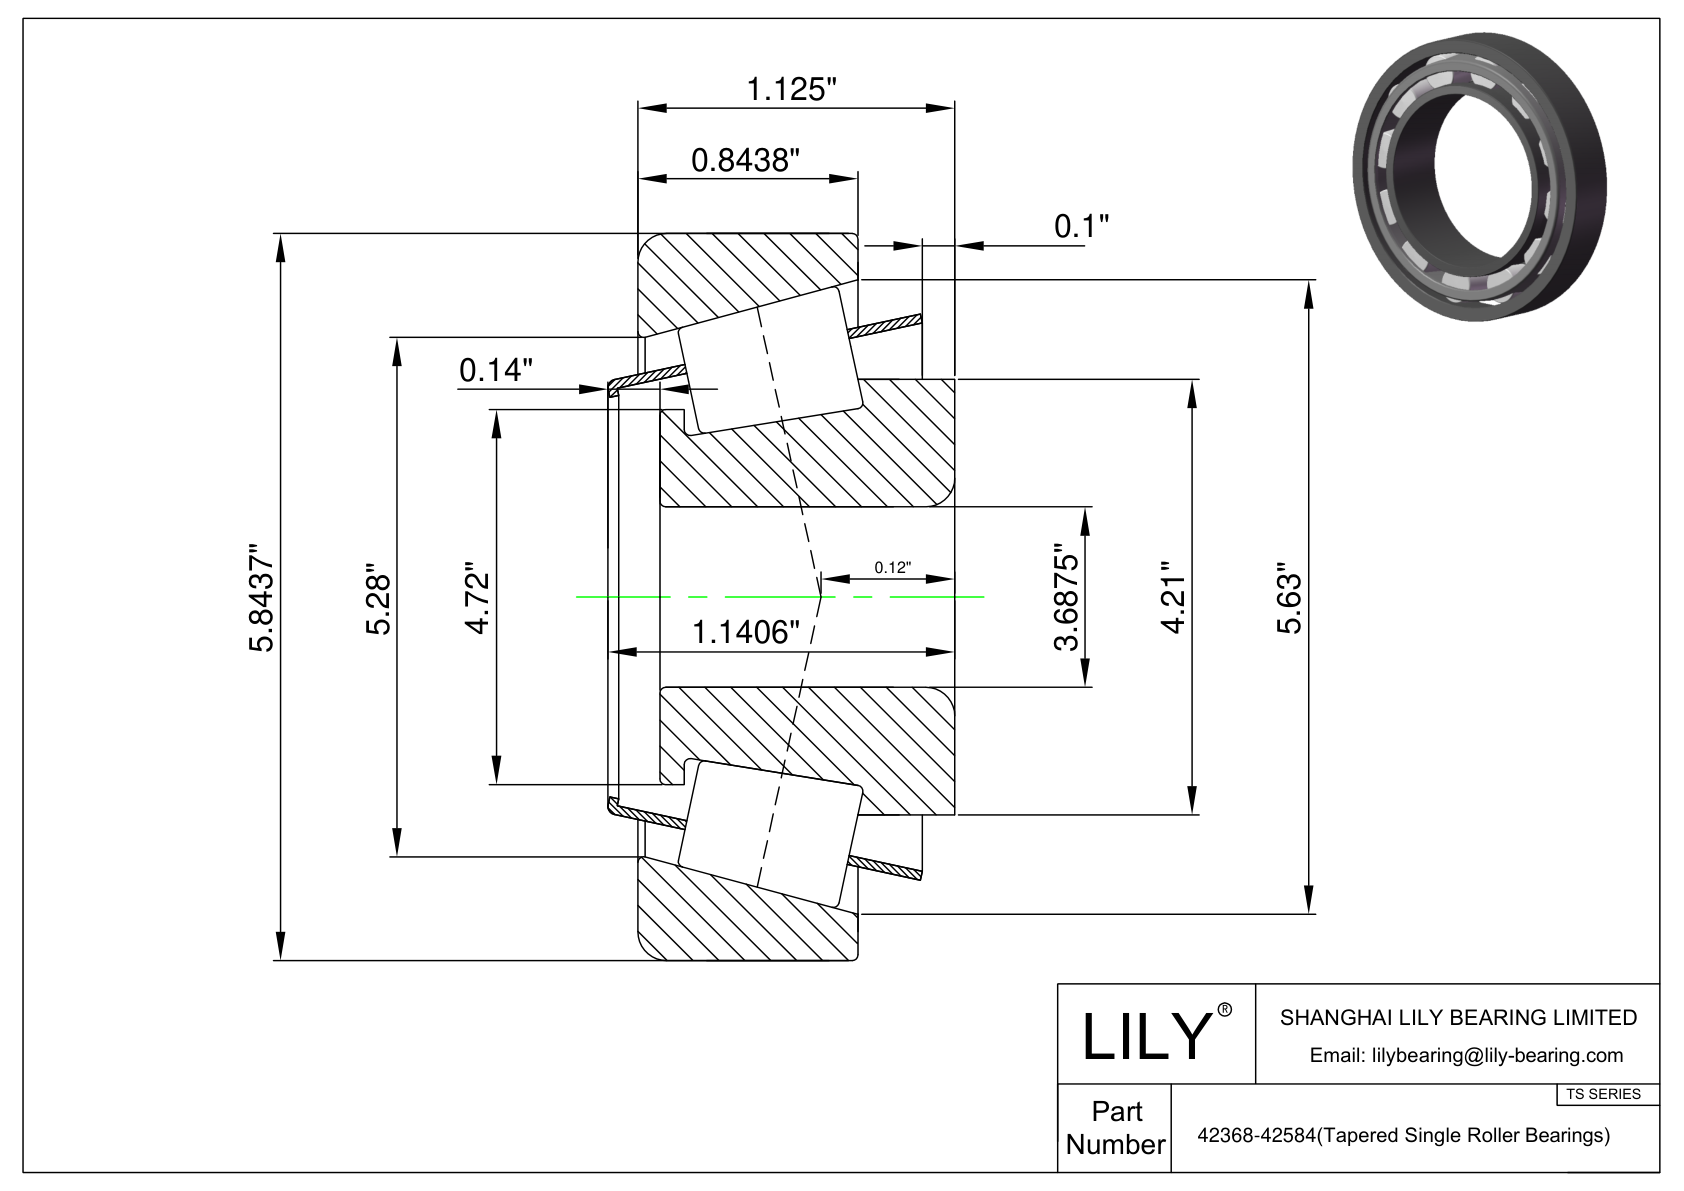 42368-42584 TS (Tapered Single Roller Bearings) (Imperial) cad drawing